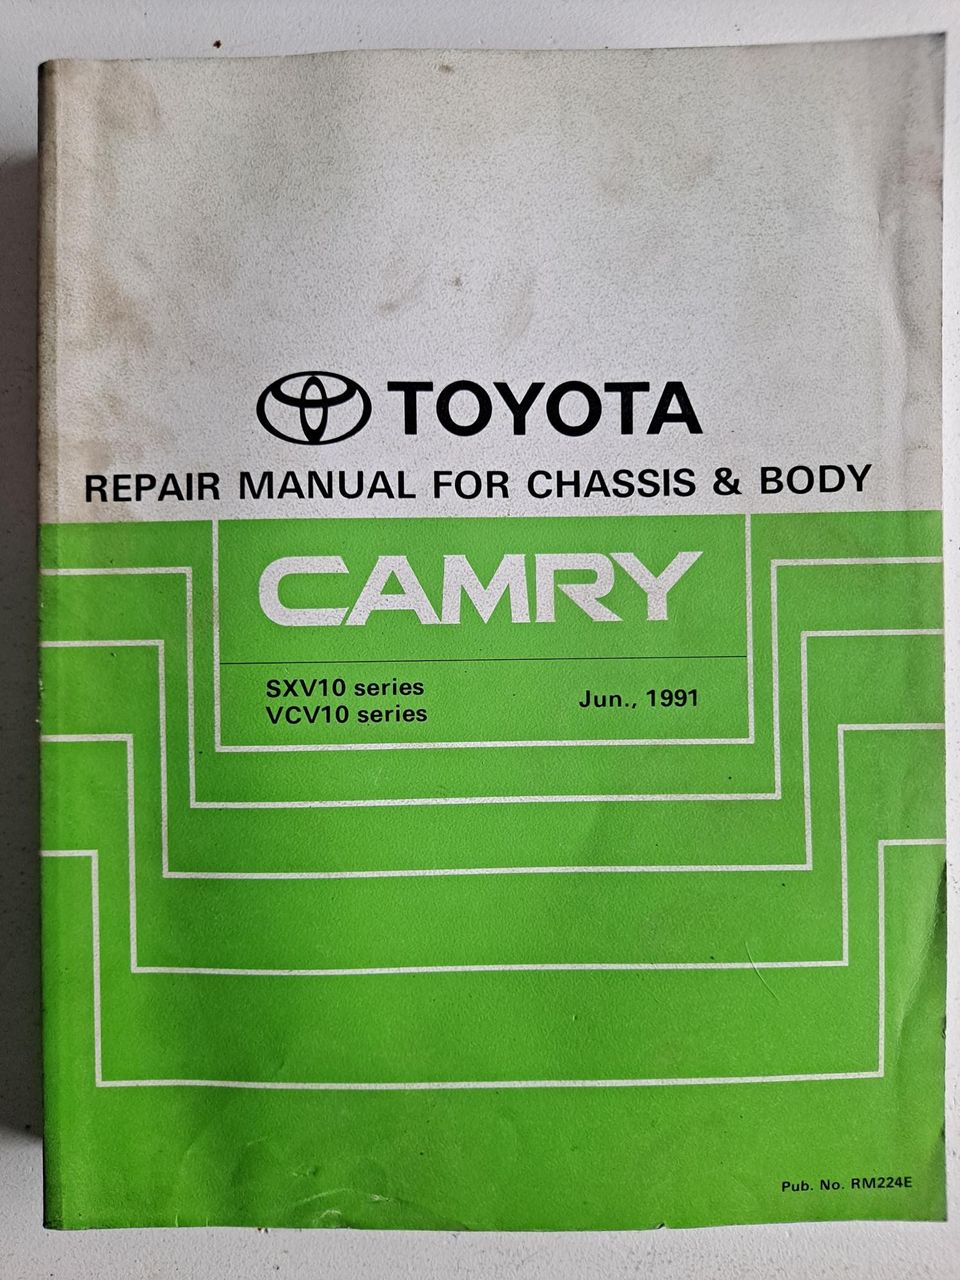 Toyota Camry Chassis